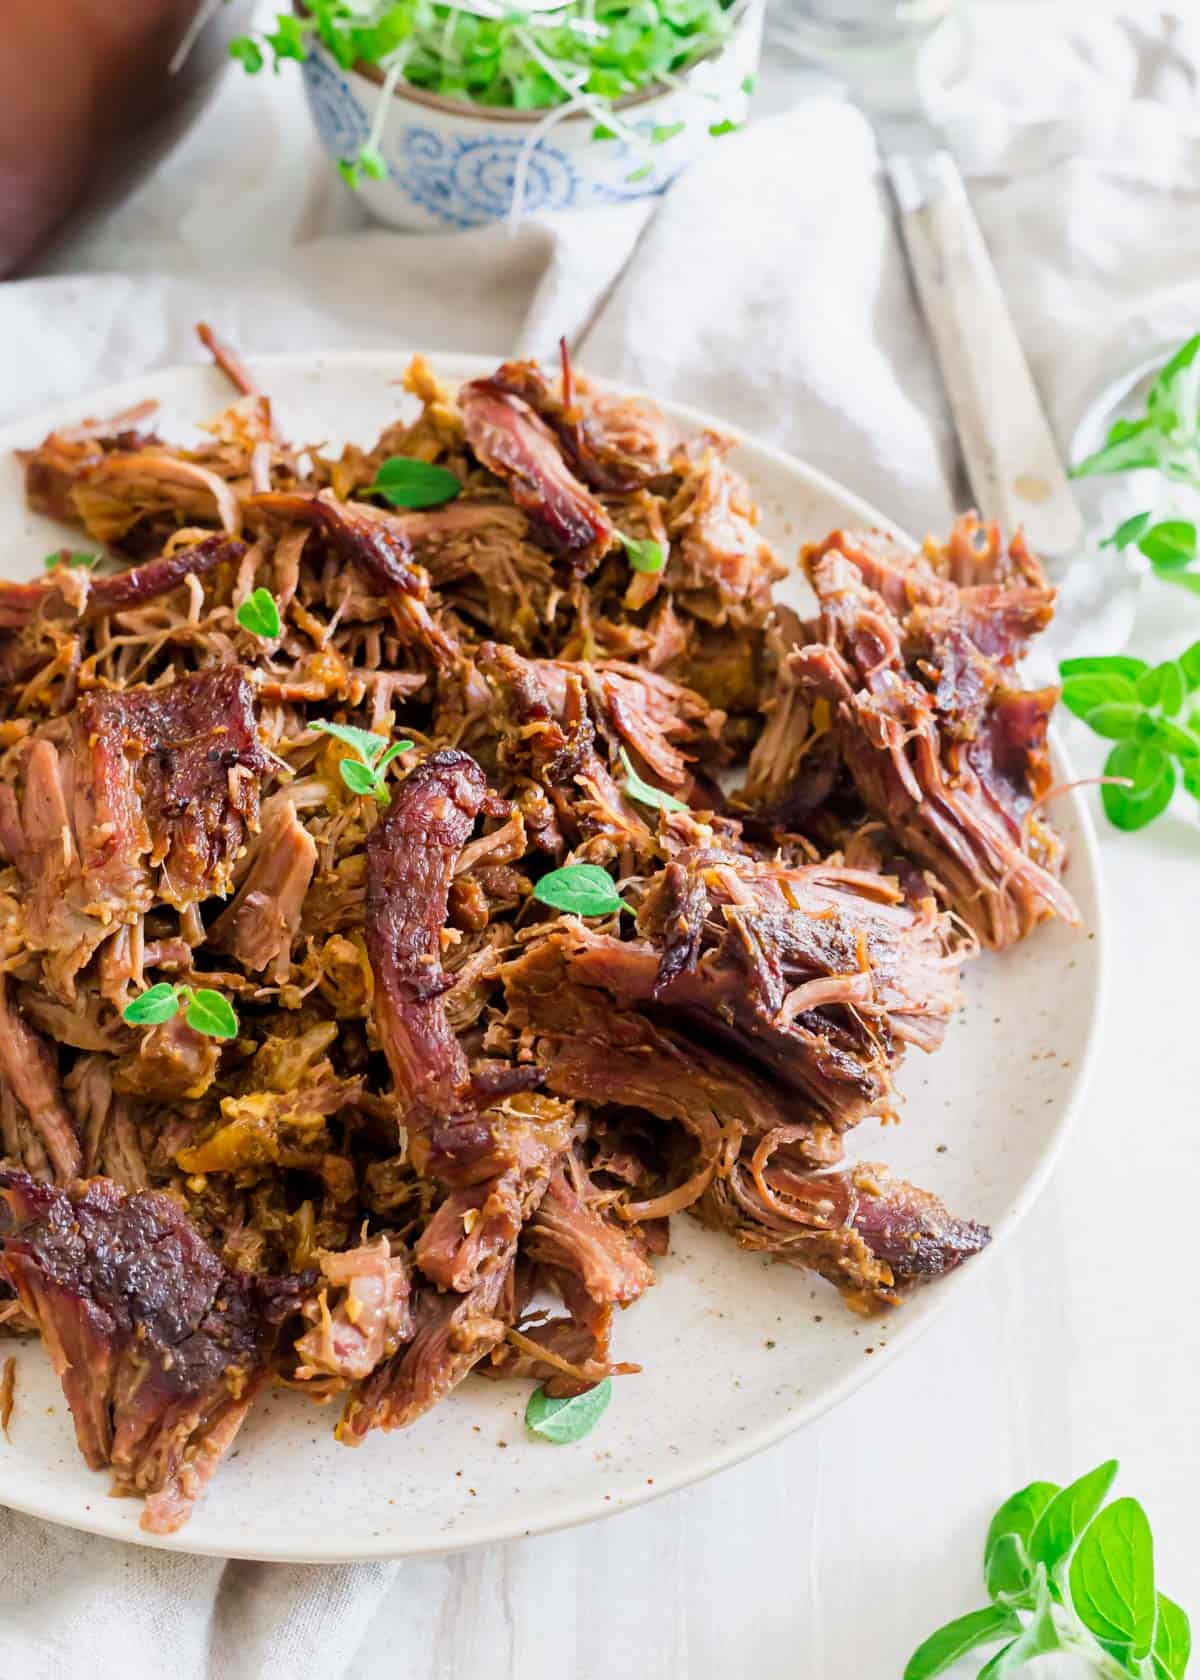 Shredded braised leg of lamb on a plate with fresh oregano can be used in a variety of different lamb dishes.